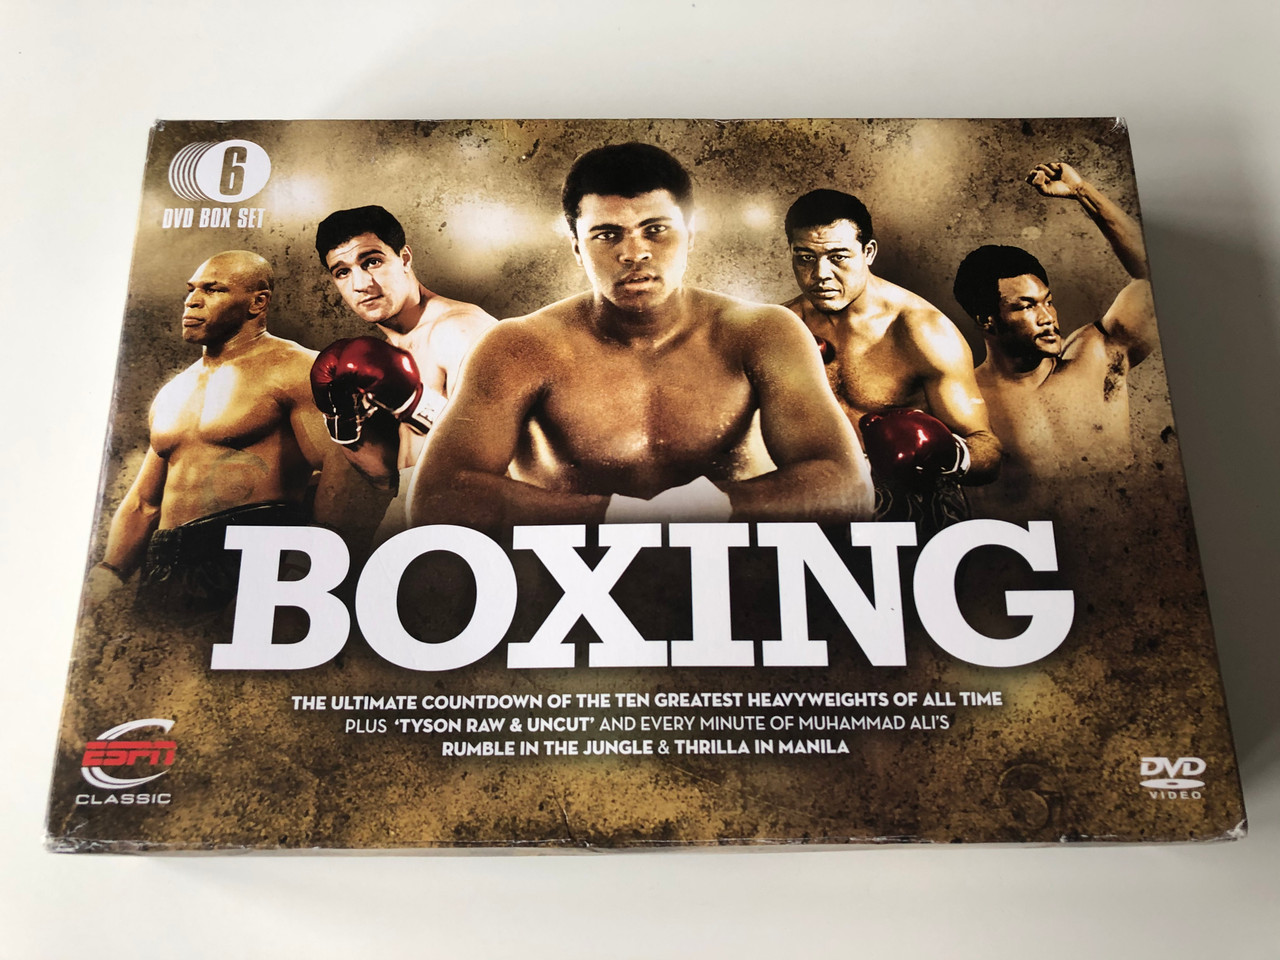 Boxing 6 DVD Box SET / The ultimate countdown of the Ten Greatest  HeavyWeights of all time plus Tyson Raw & Uncut / Muhammad Ali's Rumble in  the Jungle & Thrilla in Manila - bibleinmylanguage